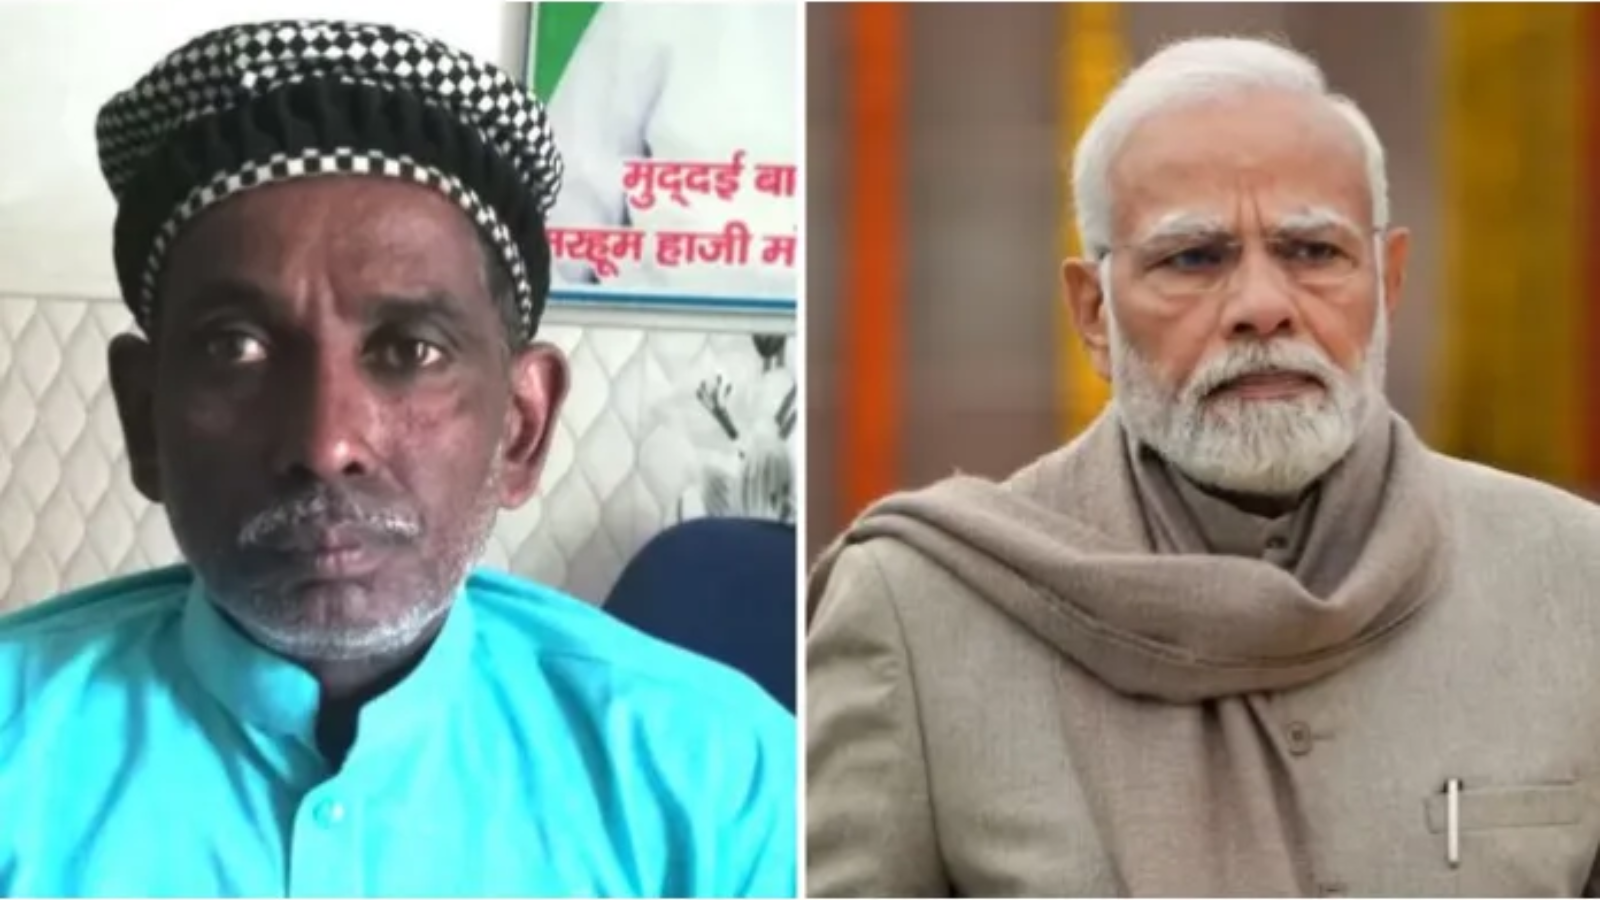 Prime Minister Modi Highlights Iqbal Ansari’s Presence at Ram Temple’s Inauguration Ceremony; Contrasts With Congress Party Leaders